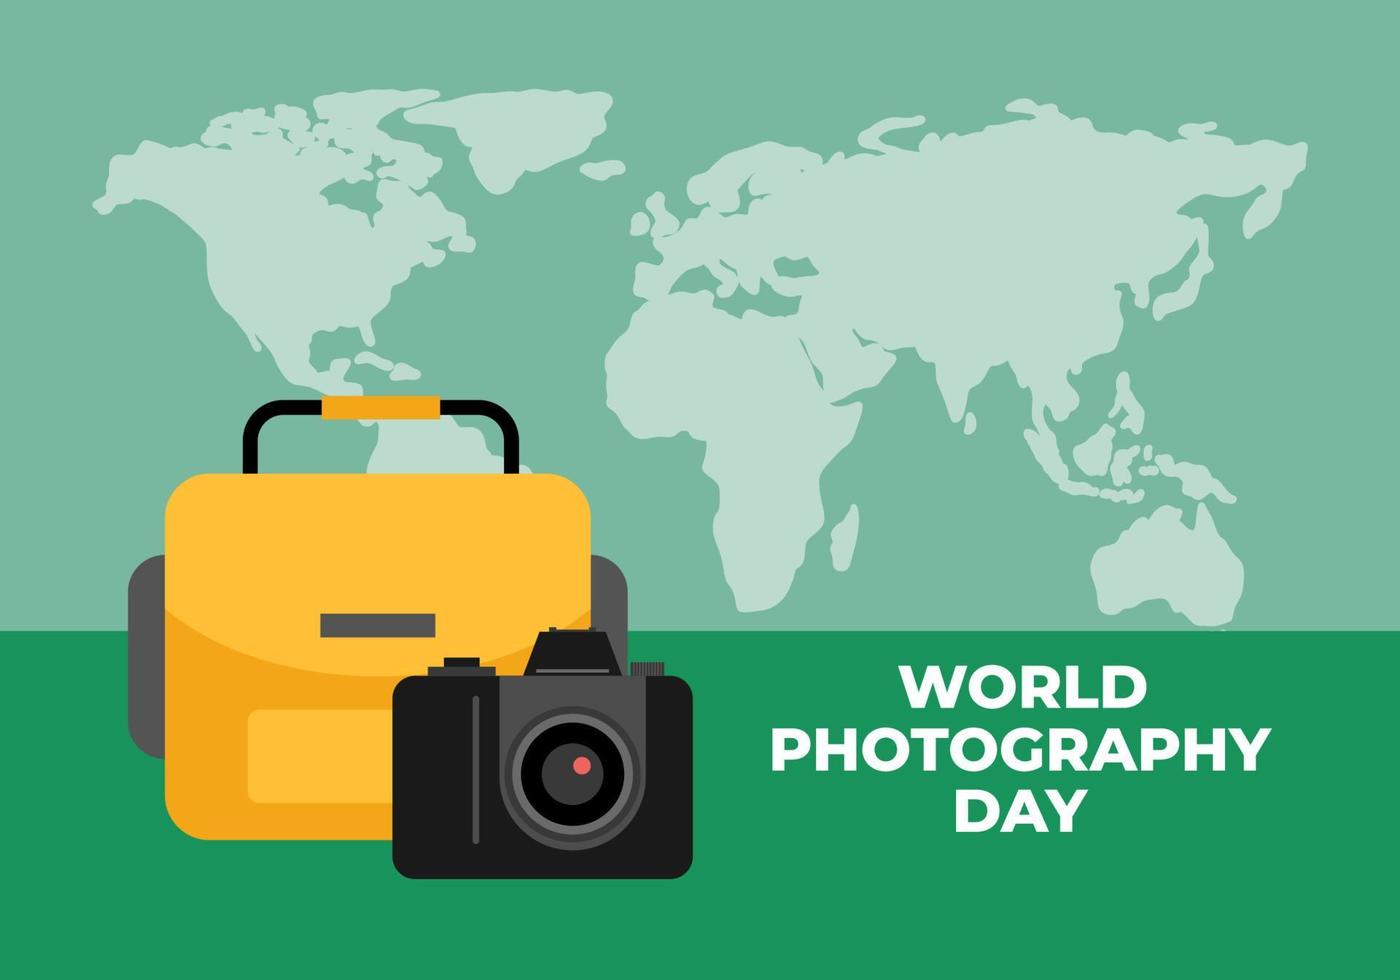 World photography day banner poster on august 19 with camera bag and world map on green background. vector